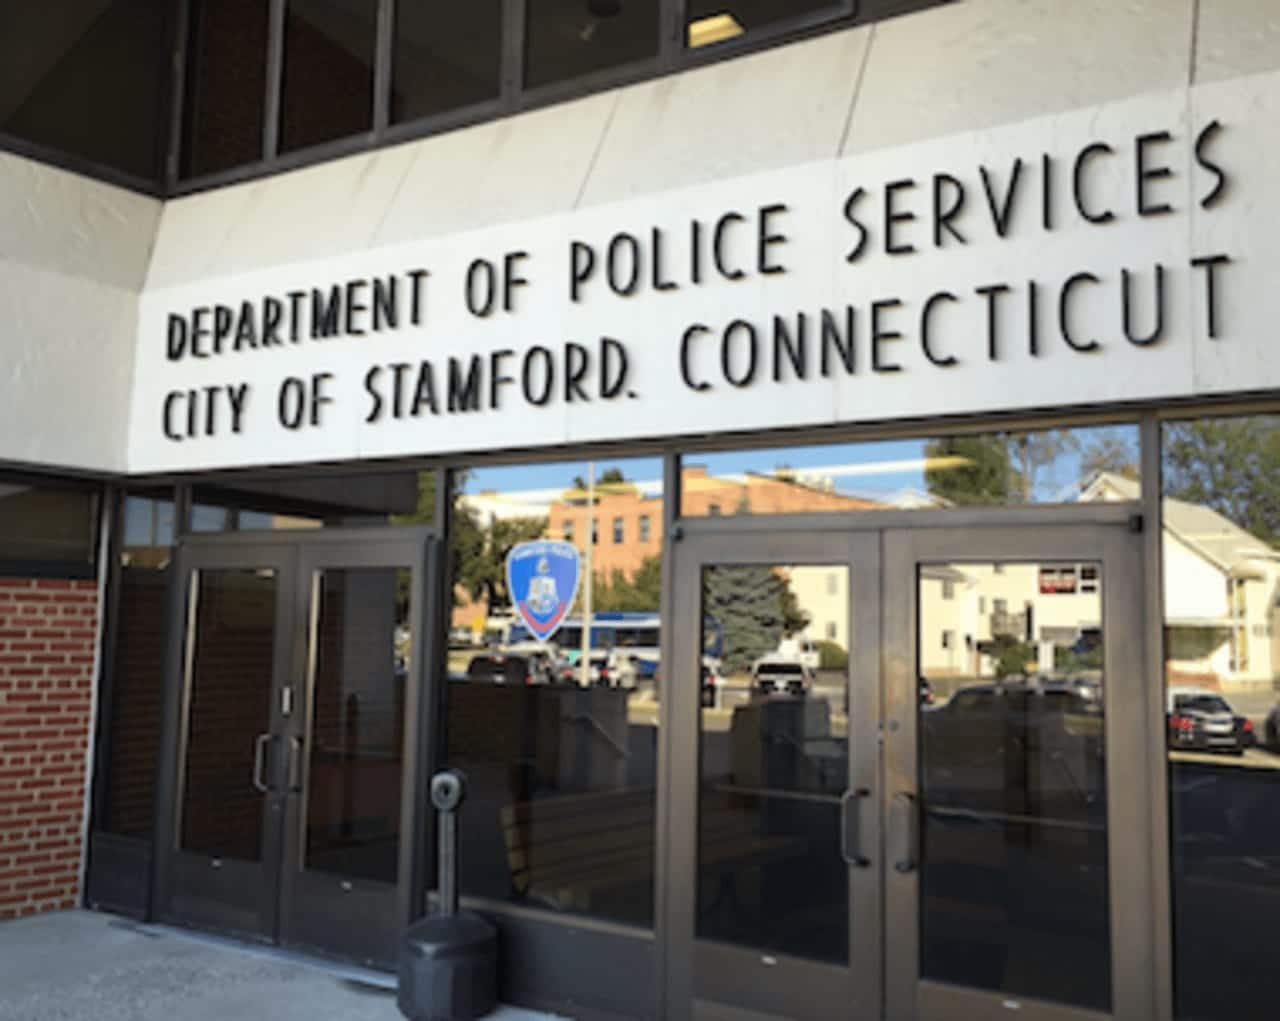 Stamford Police said a child's imagination led to report of two clowns armed with knives.